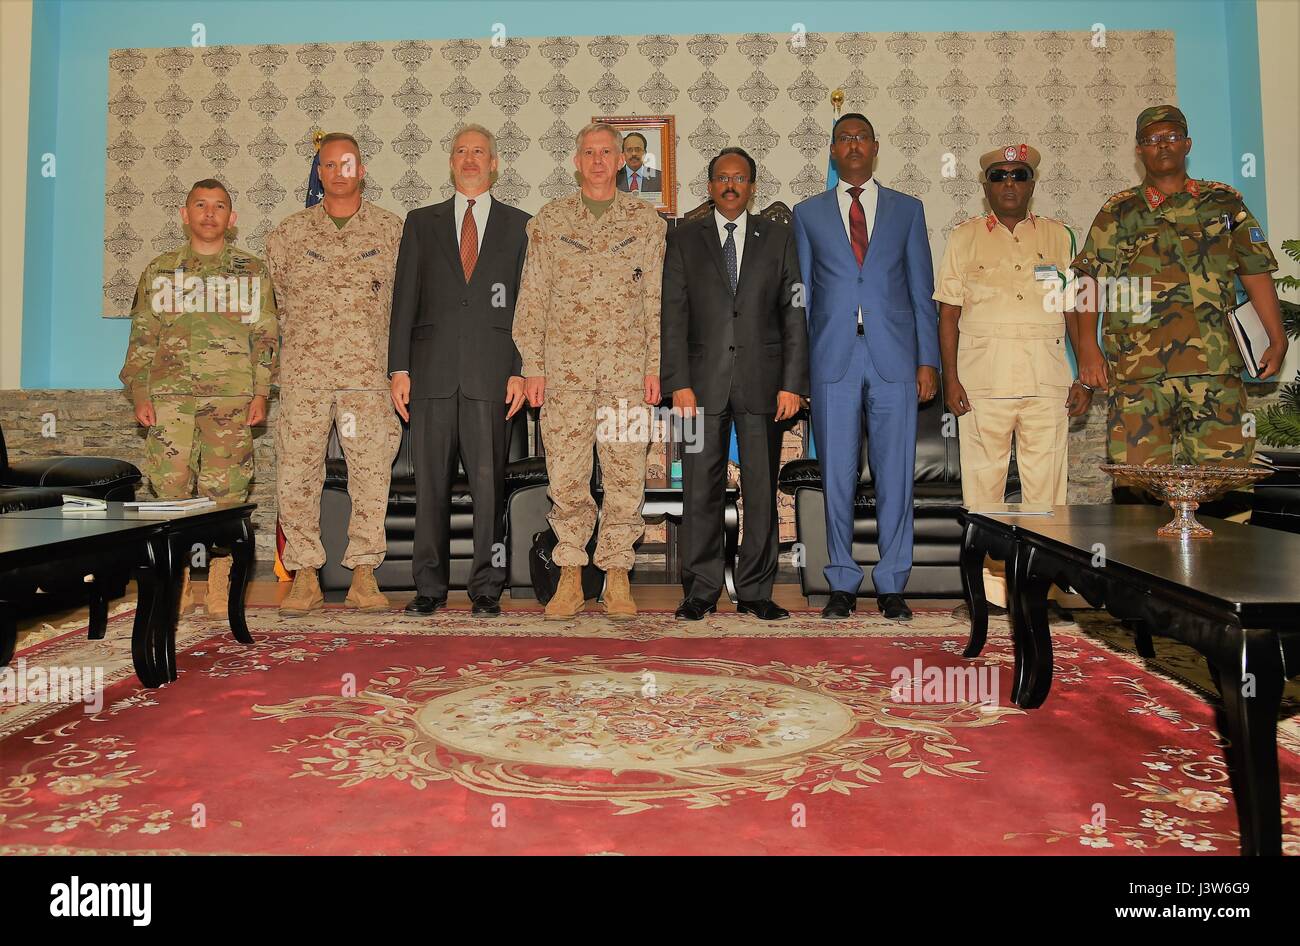 U.S. Africa Command commander U.S. Marine Corps Gen. Thomas D. Waldhauser, U.S. and President of Somalia Mohamed Abdullahi Mohamed, known by his nickname “Farmajo,” stand alongside their respective dignitaries and military coterie after their meeting held at Mogadishu International Airport, Somalia, April 29, 2017. With its partners, USAFRICOM works to neutralize transnational threats, protect U.S. personnel and facilities, prevent and mitigate conflict, and build defense capability to promote regional stability and prosperity. (U.S. Air National Guard photo by Tech. Sgt. Andria Allmond) Stock Photo